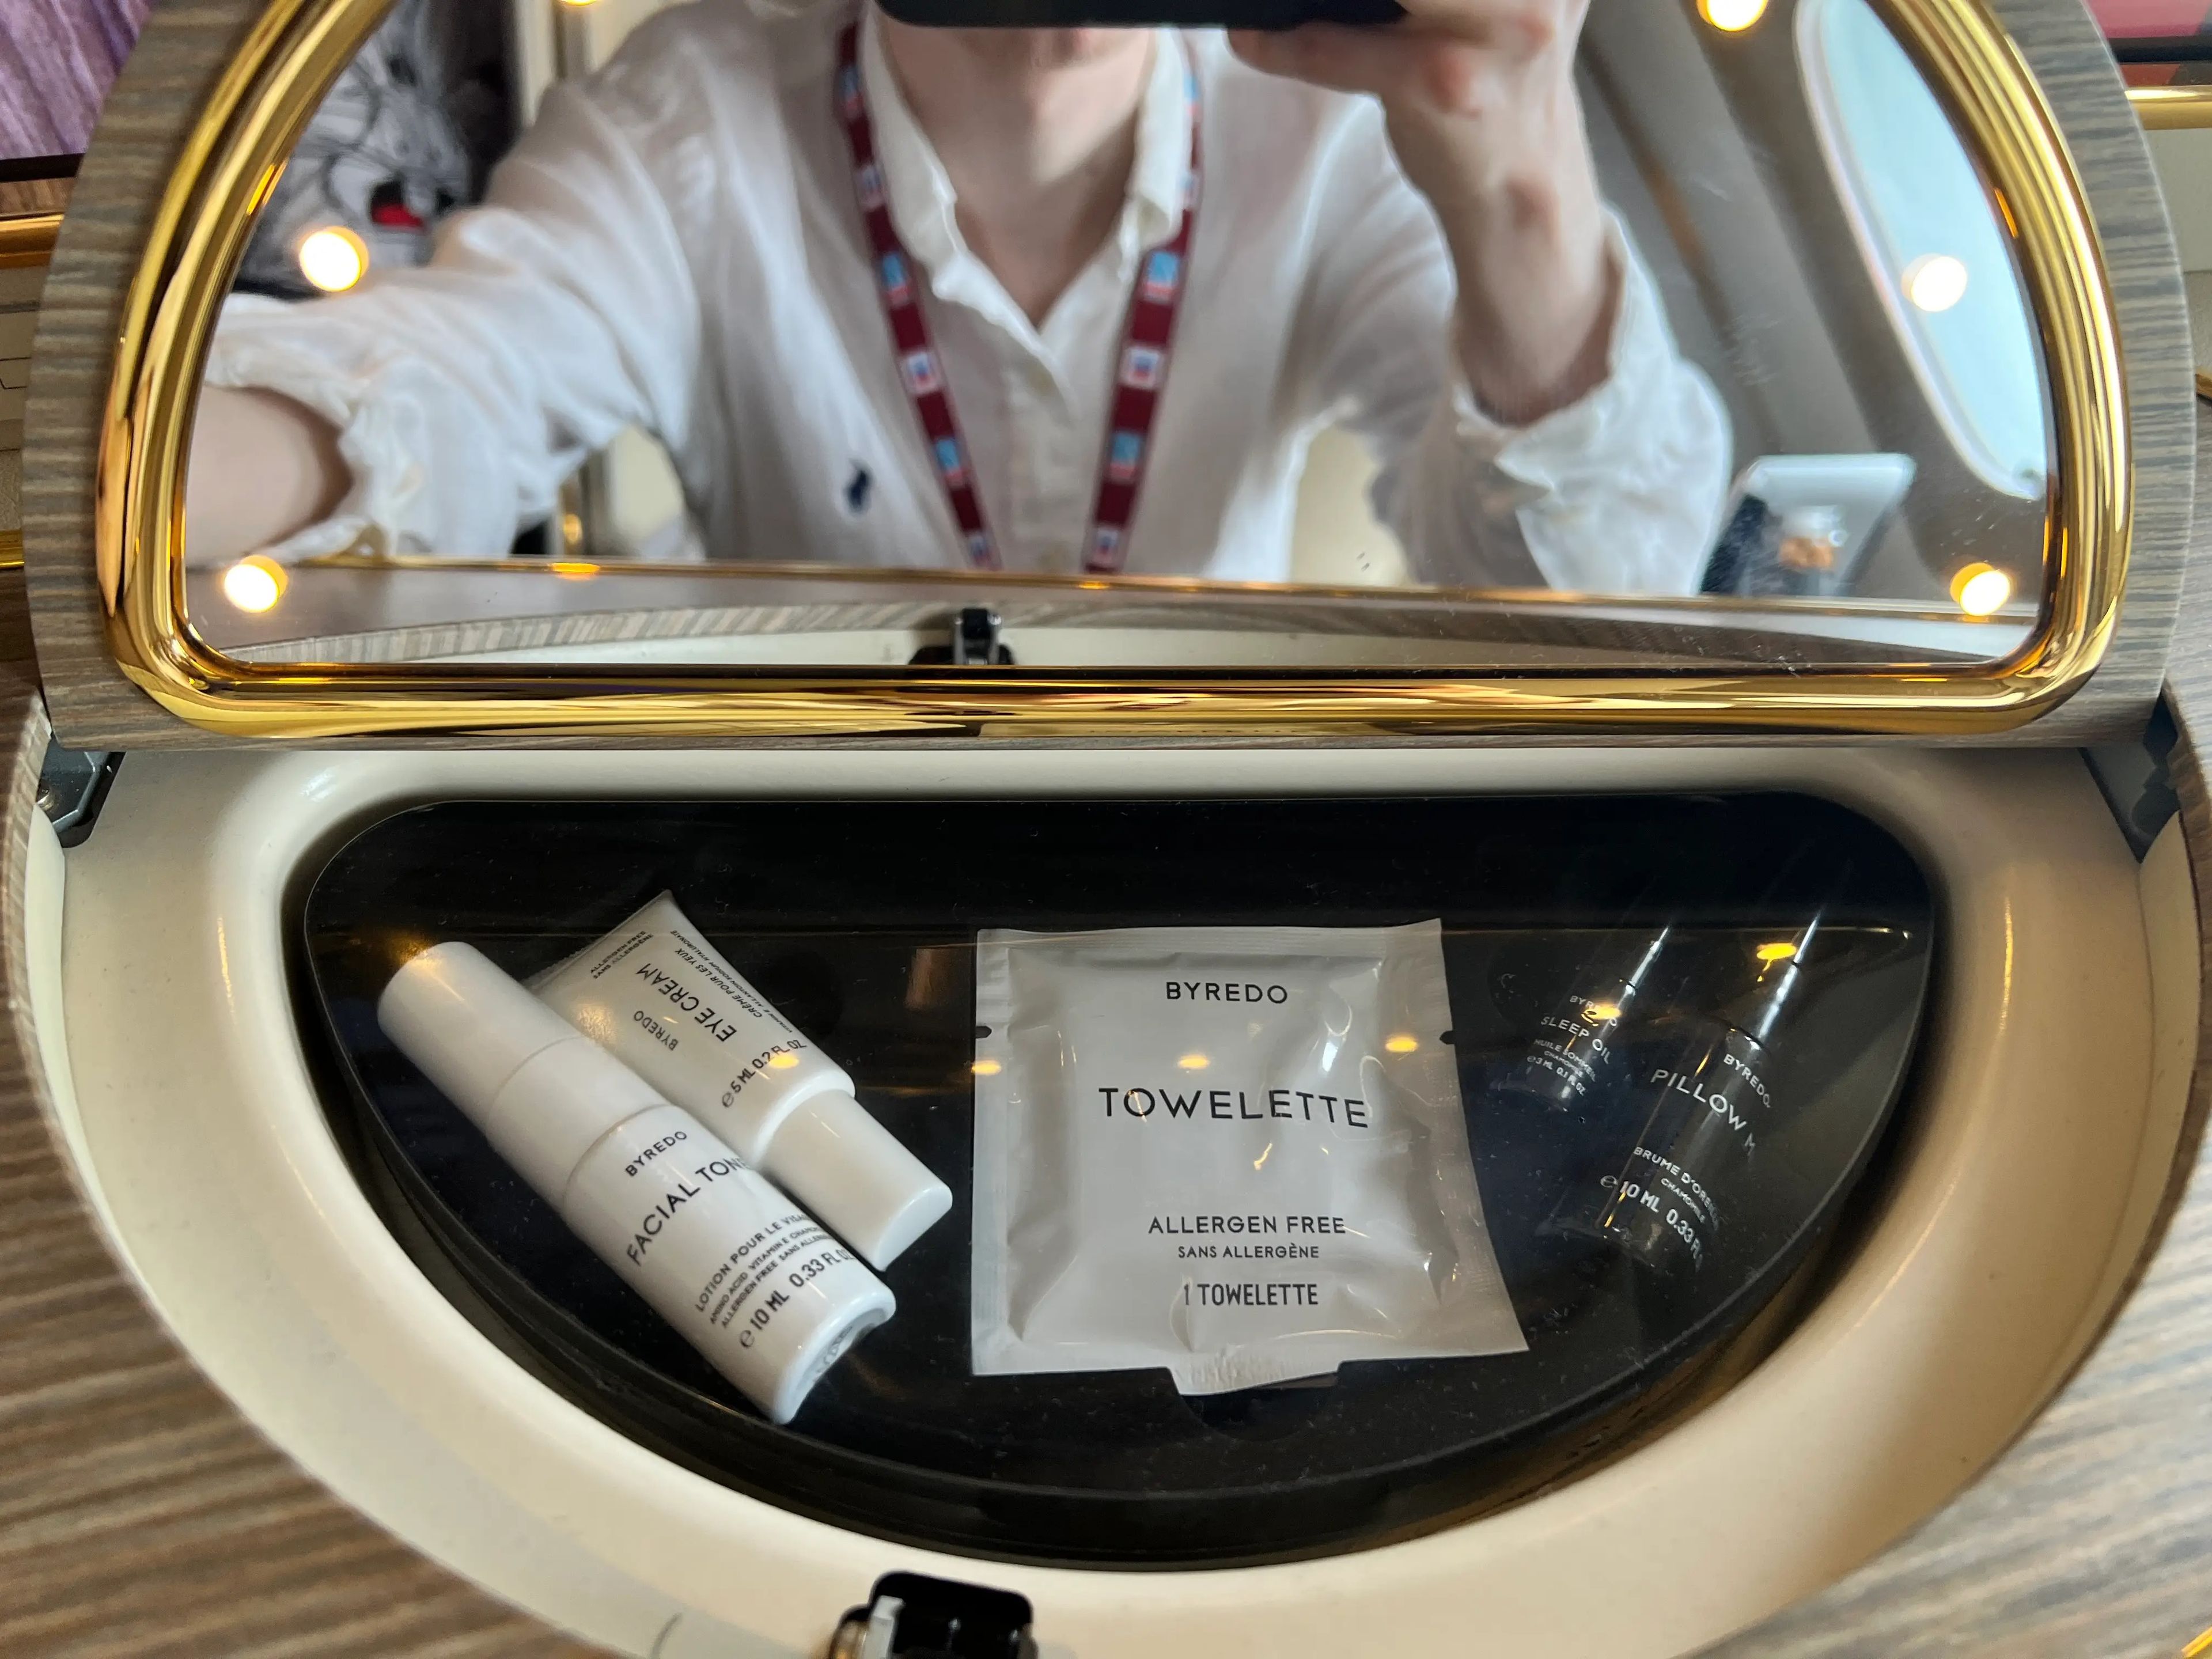 A close-up of the amenities under the vanity mirror onboard Emirates A380 first class includes small black and white bottles and a packaged towelette